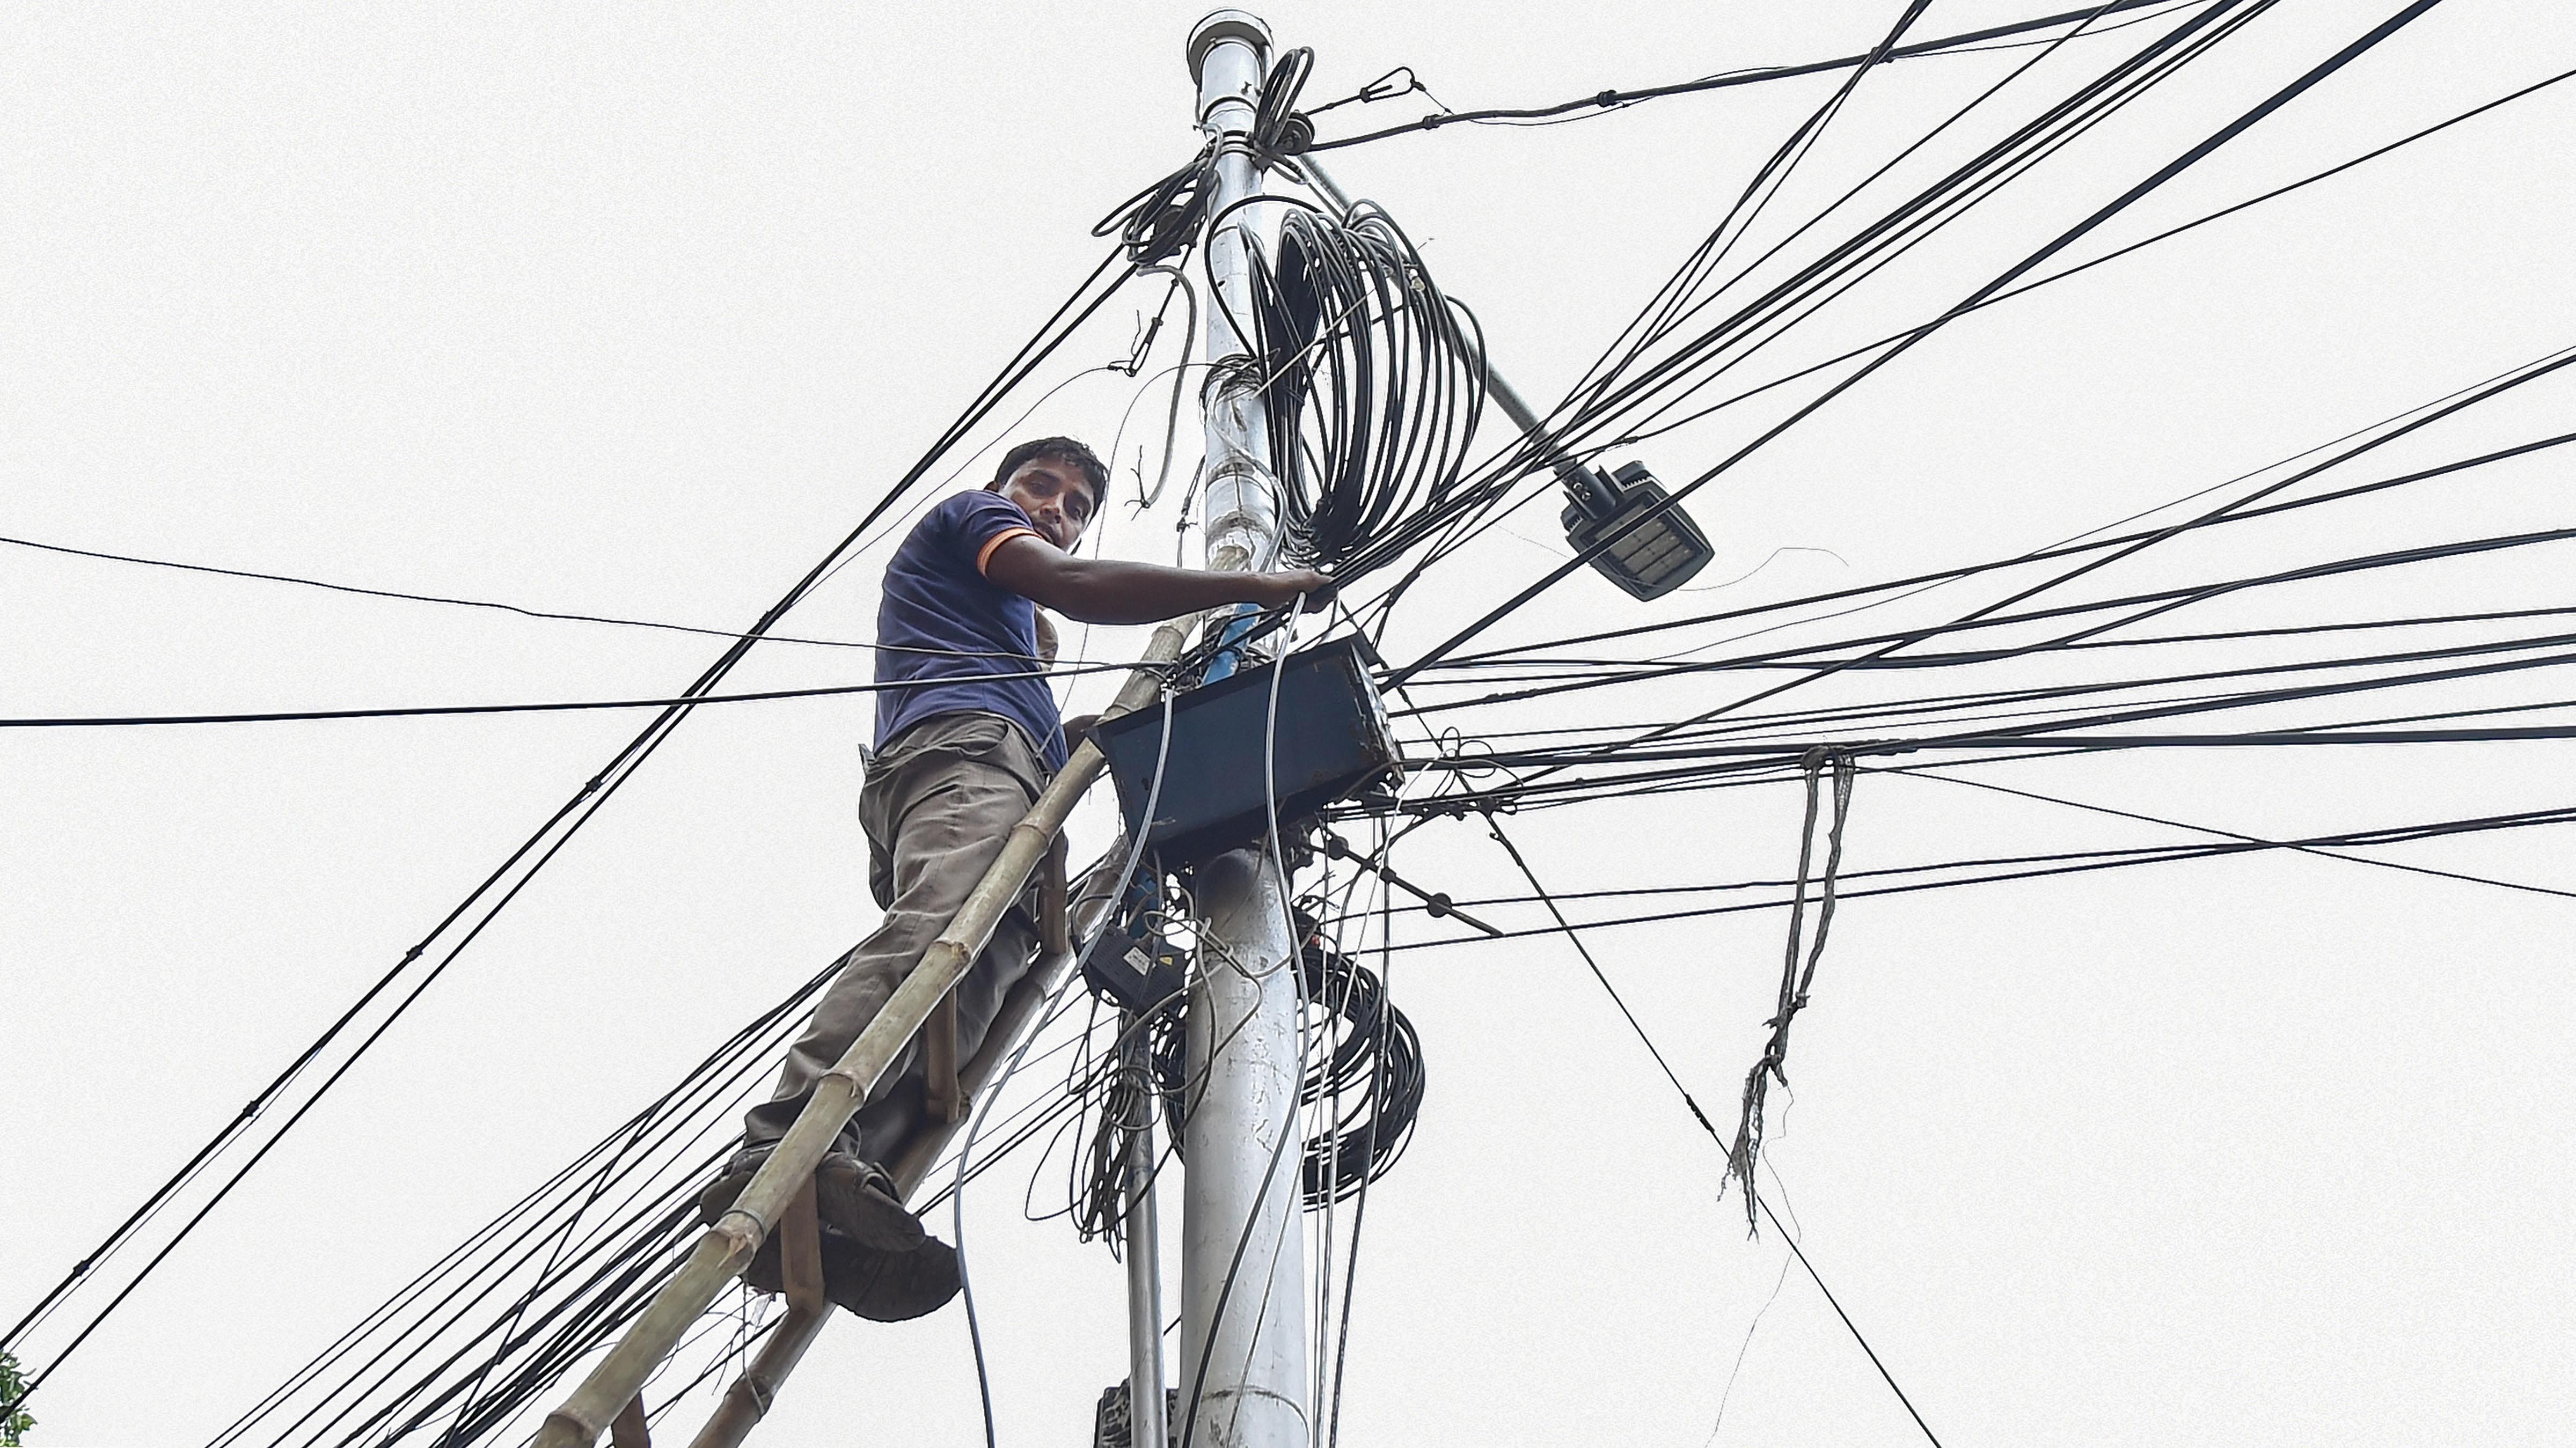 A worker restores an internet service in the aftermath of Cyclone Amphan, in Kolkata, Tuesday, May 26, 2020. (PTI Photo)